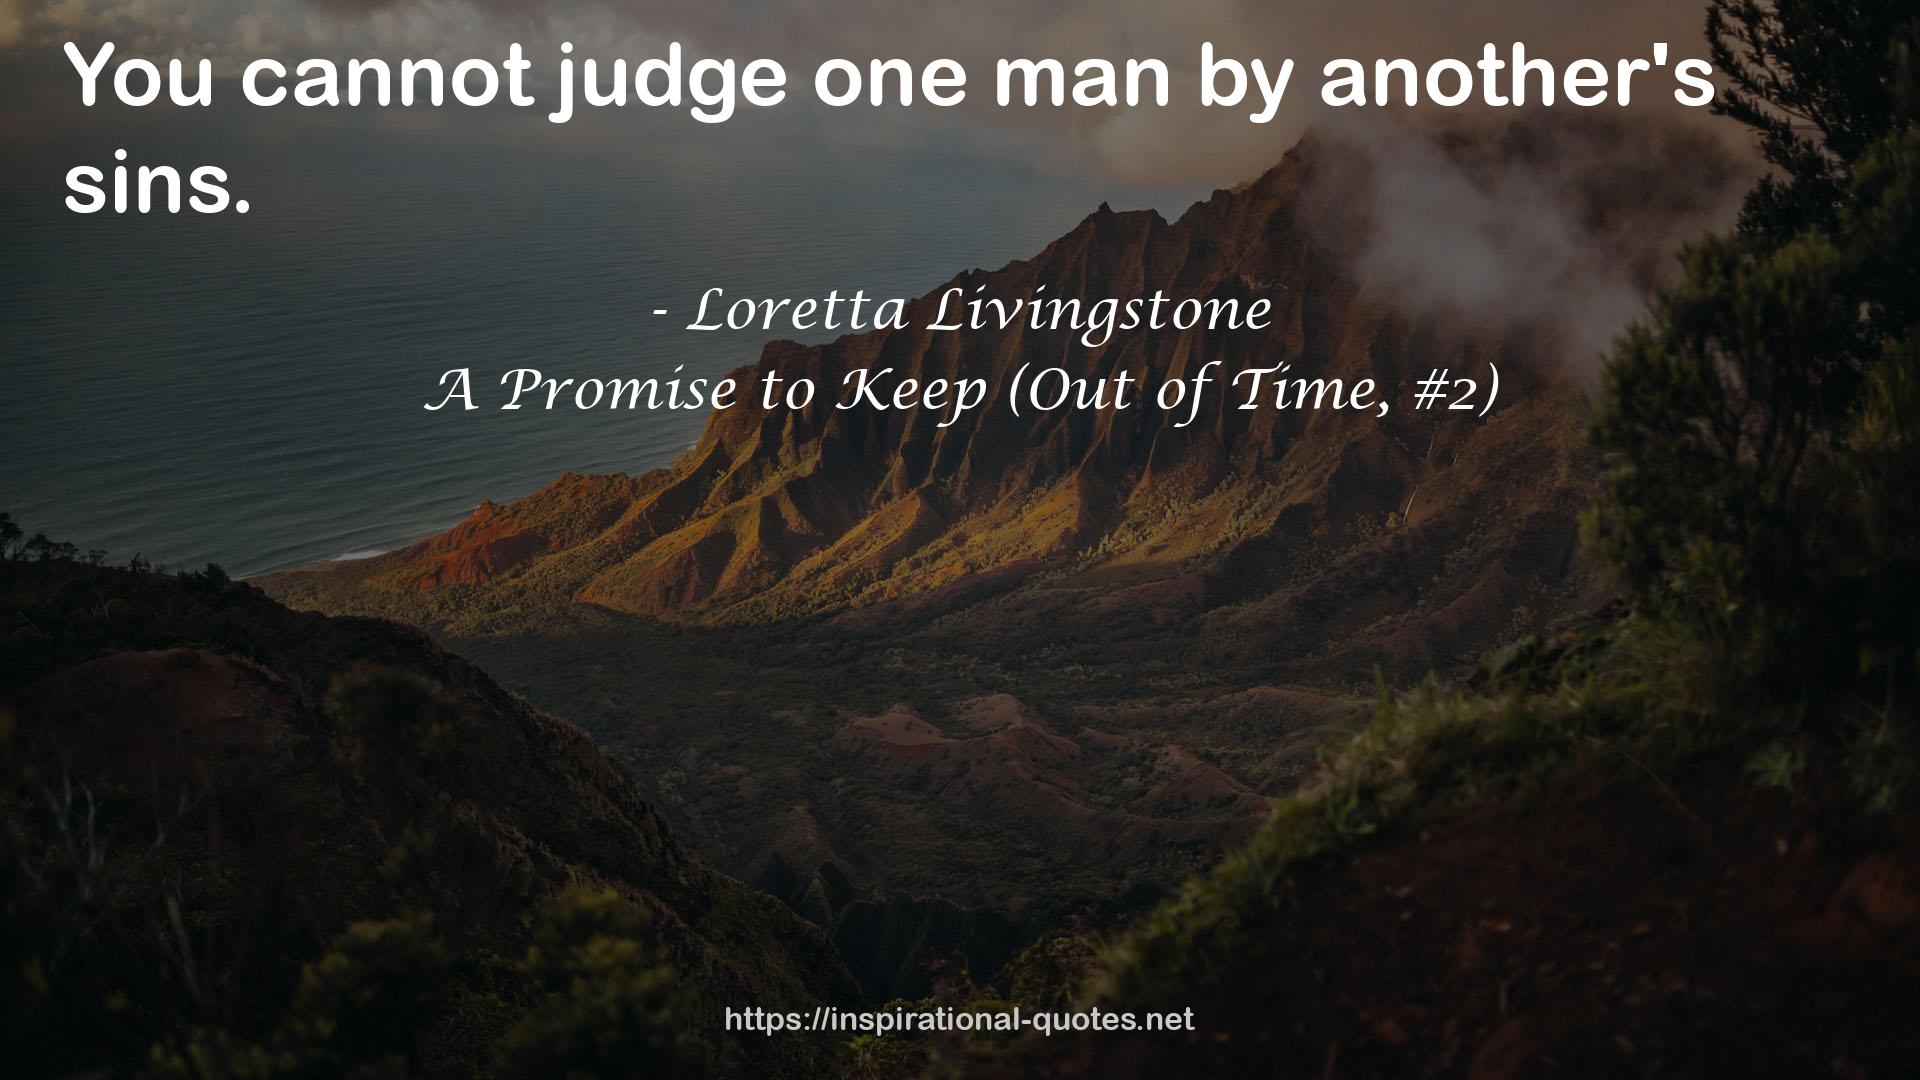 A Promise to Keep (Out of Time, #2) QUOTES